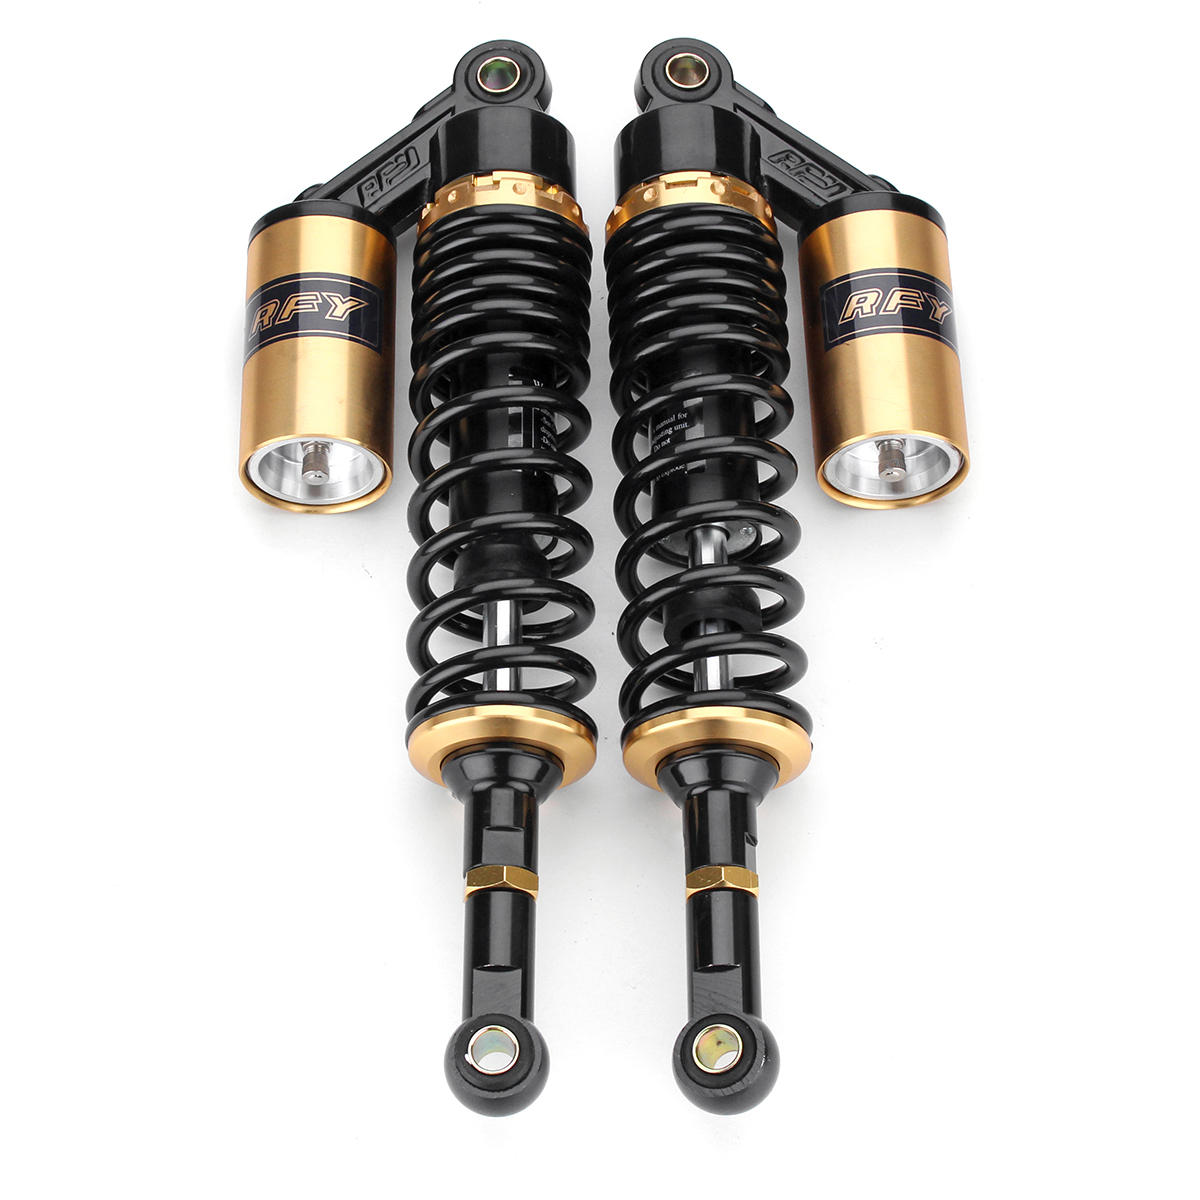 Image of 400mm 1574inch Rear Air Shock Absorbers Suspension For ATV Motorcycle Dirt Bike